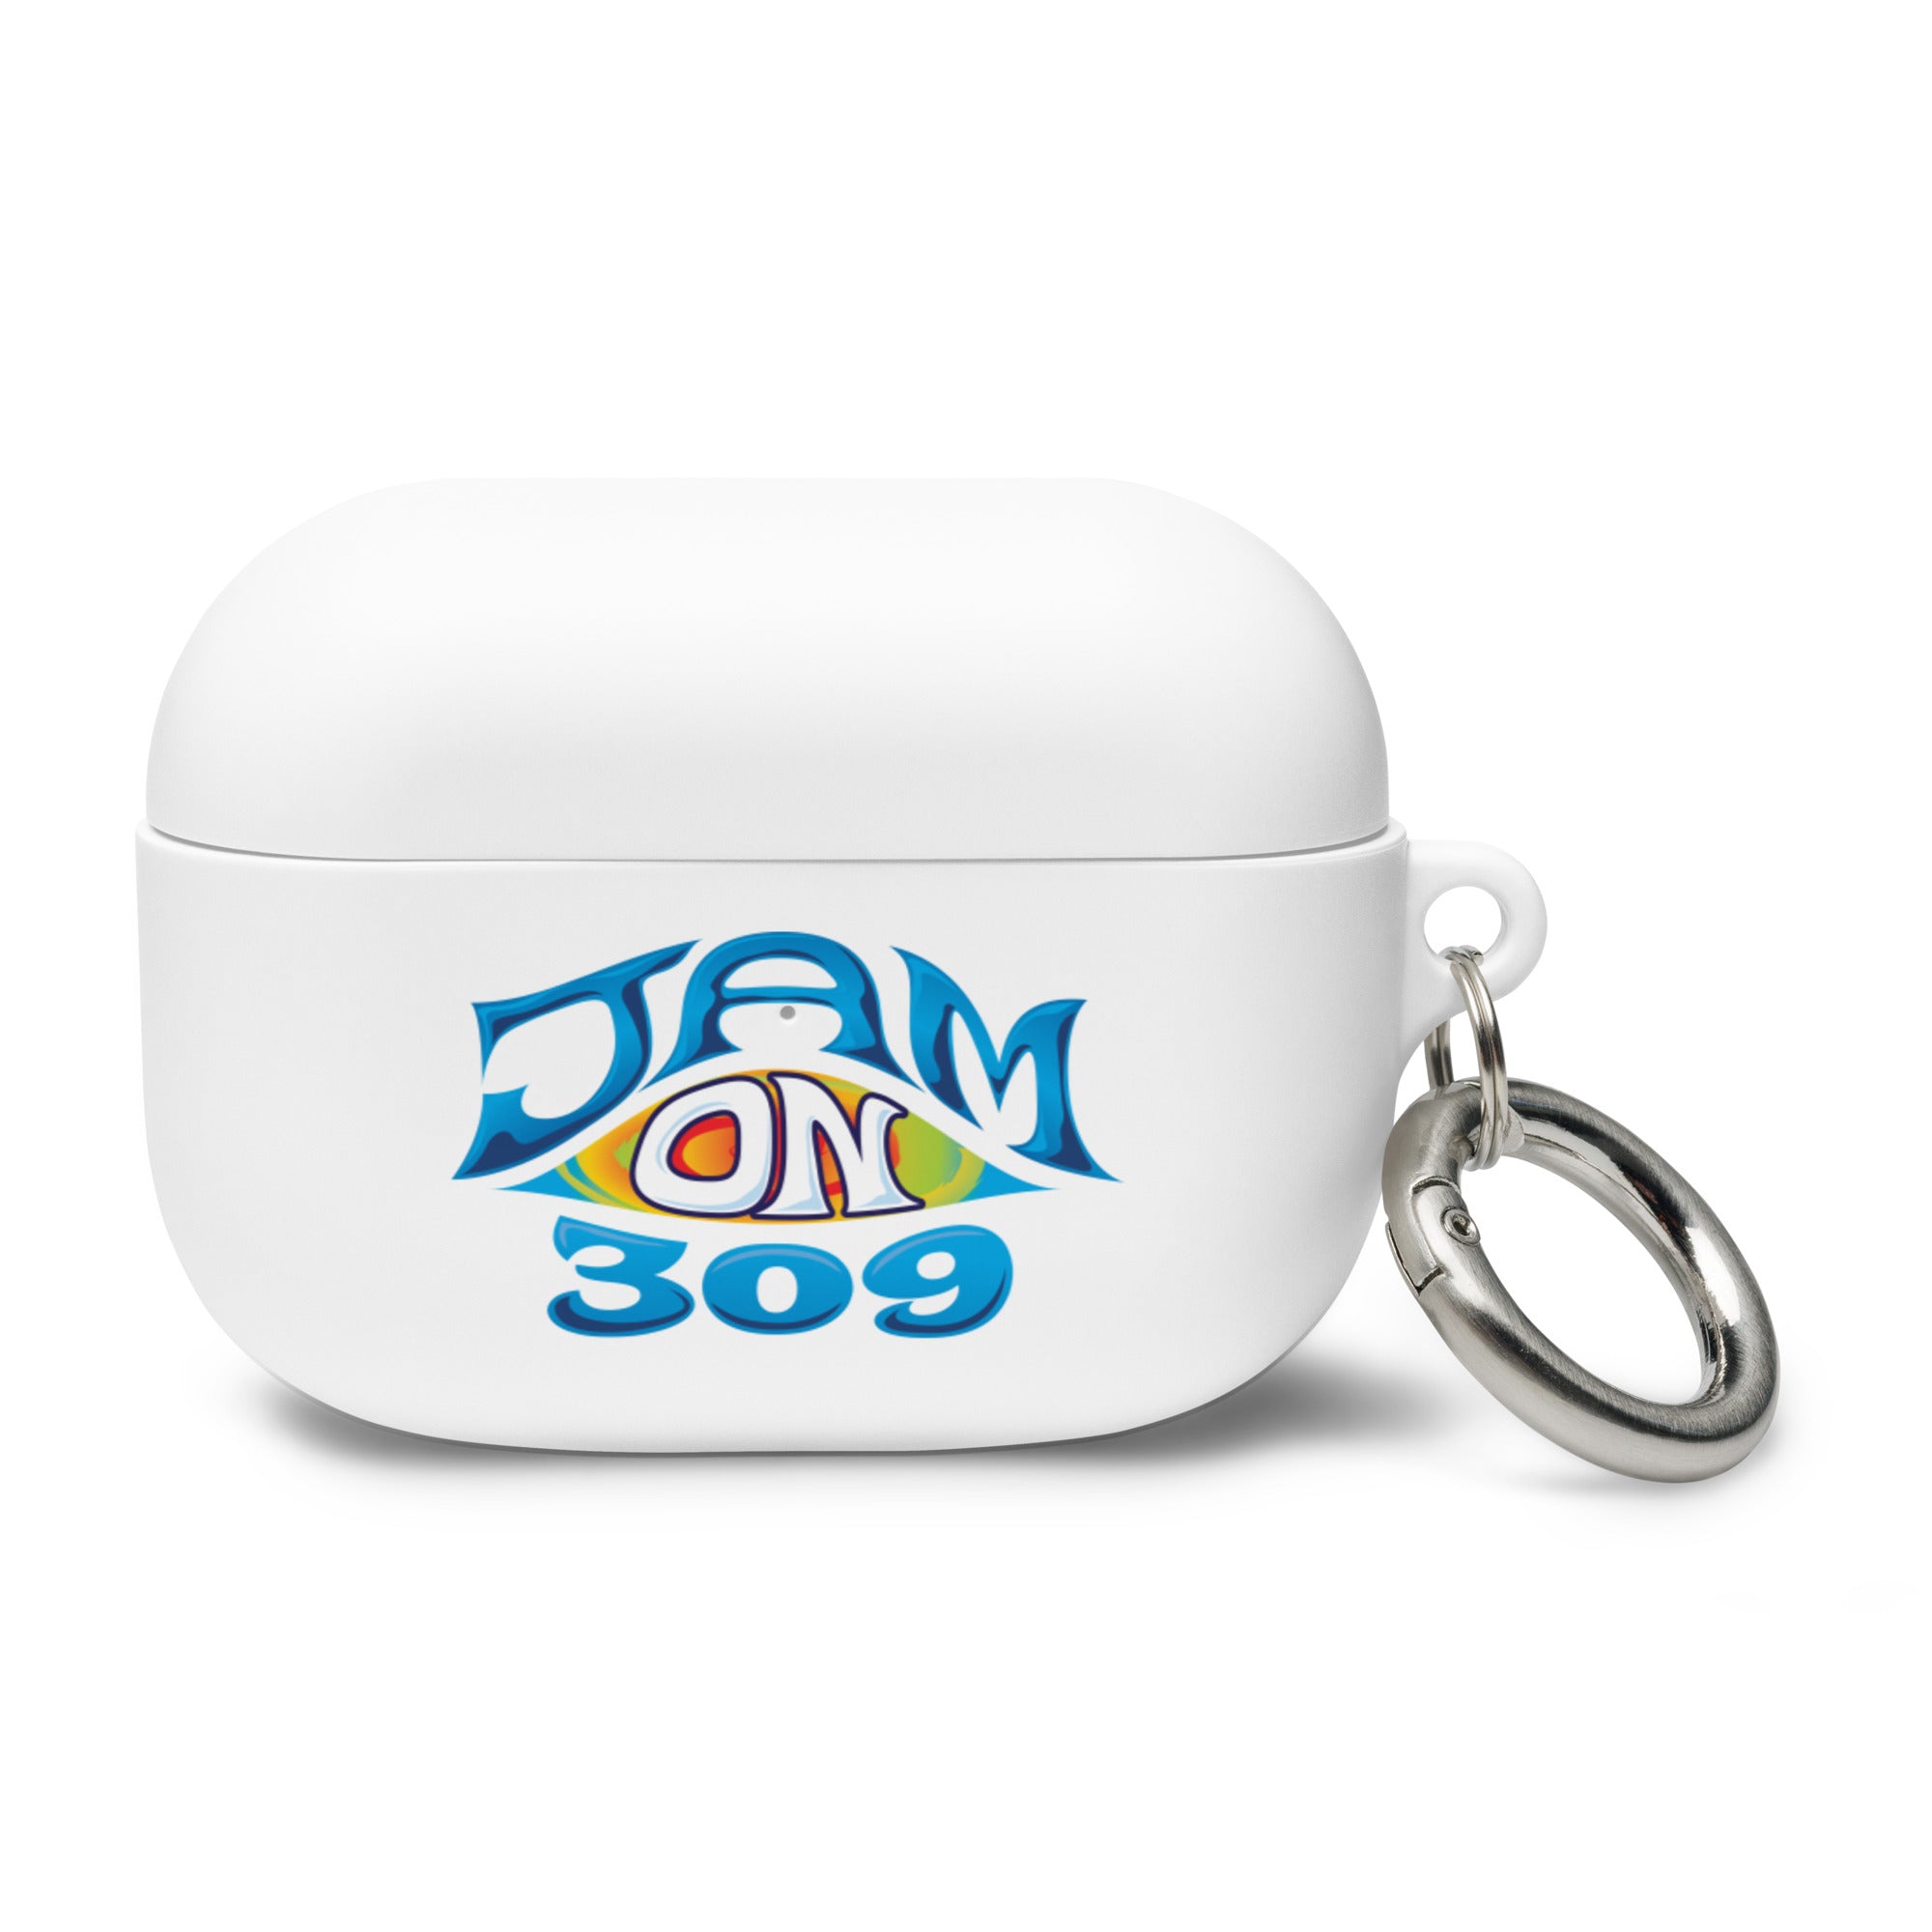 Jam on 309: AirPods® Case Cover